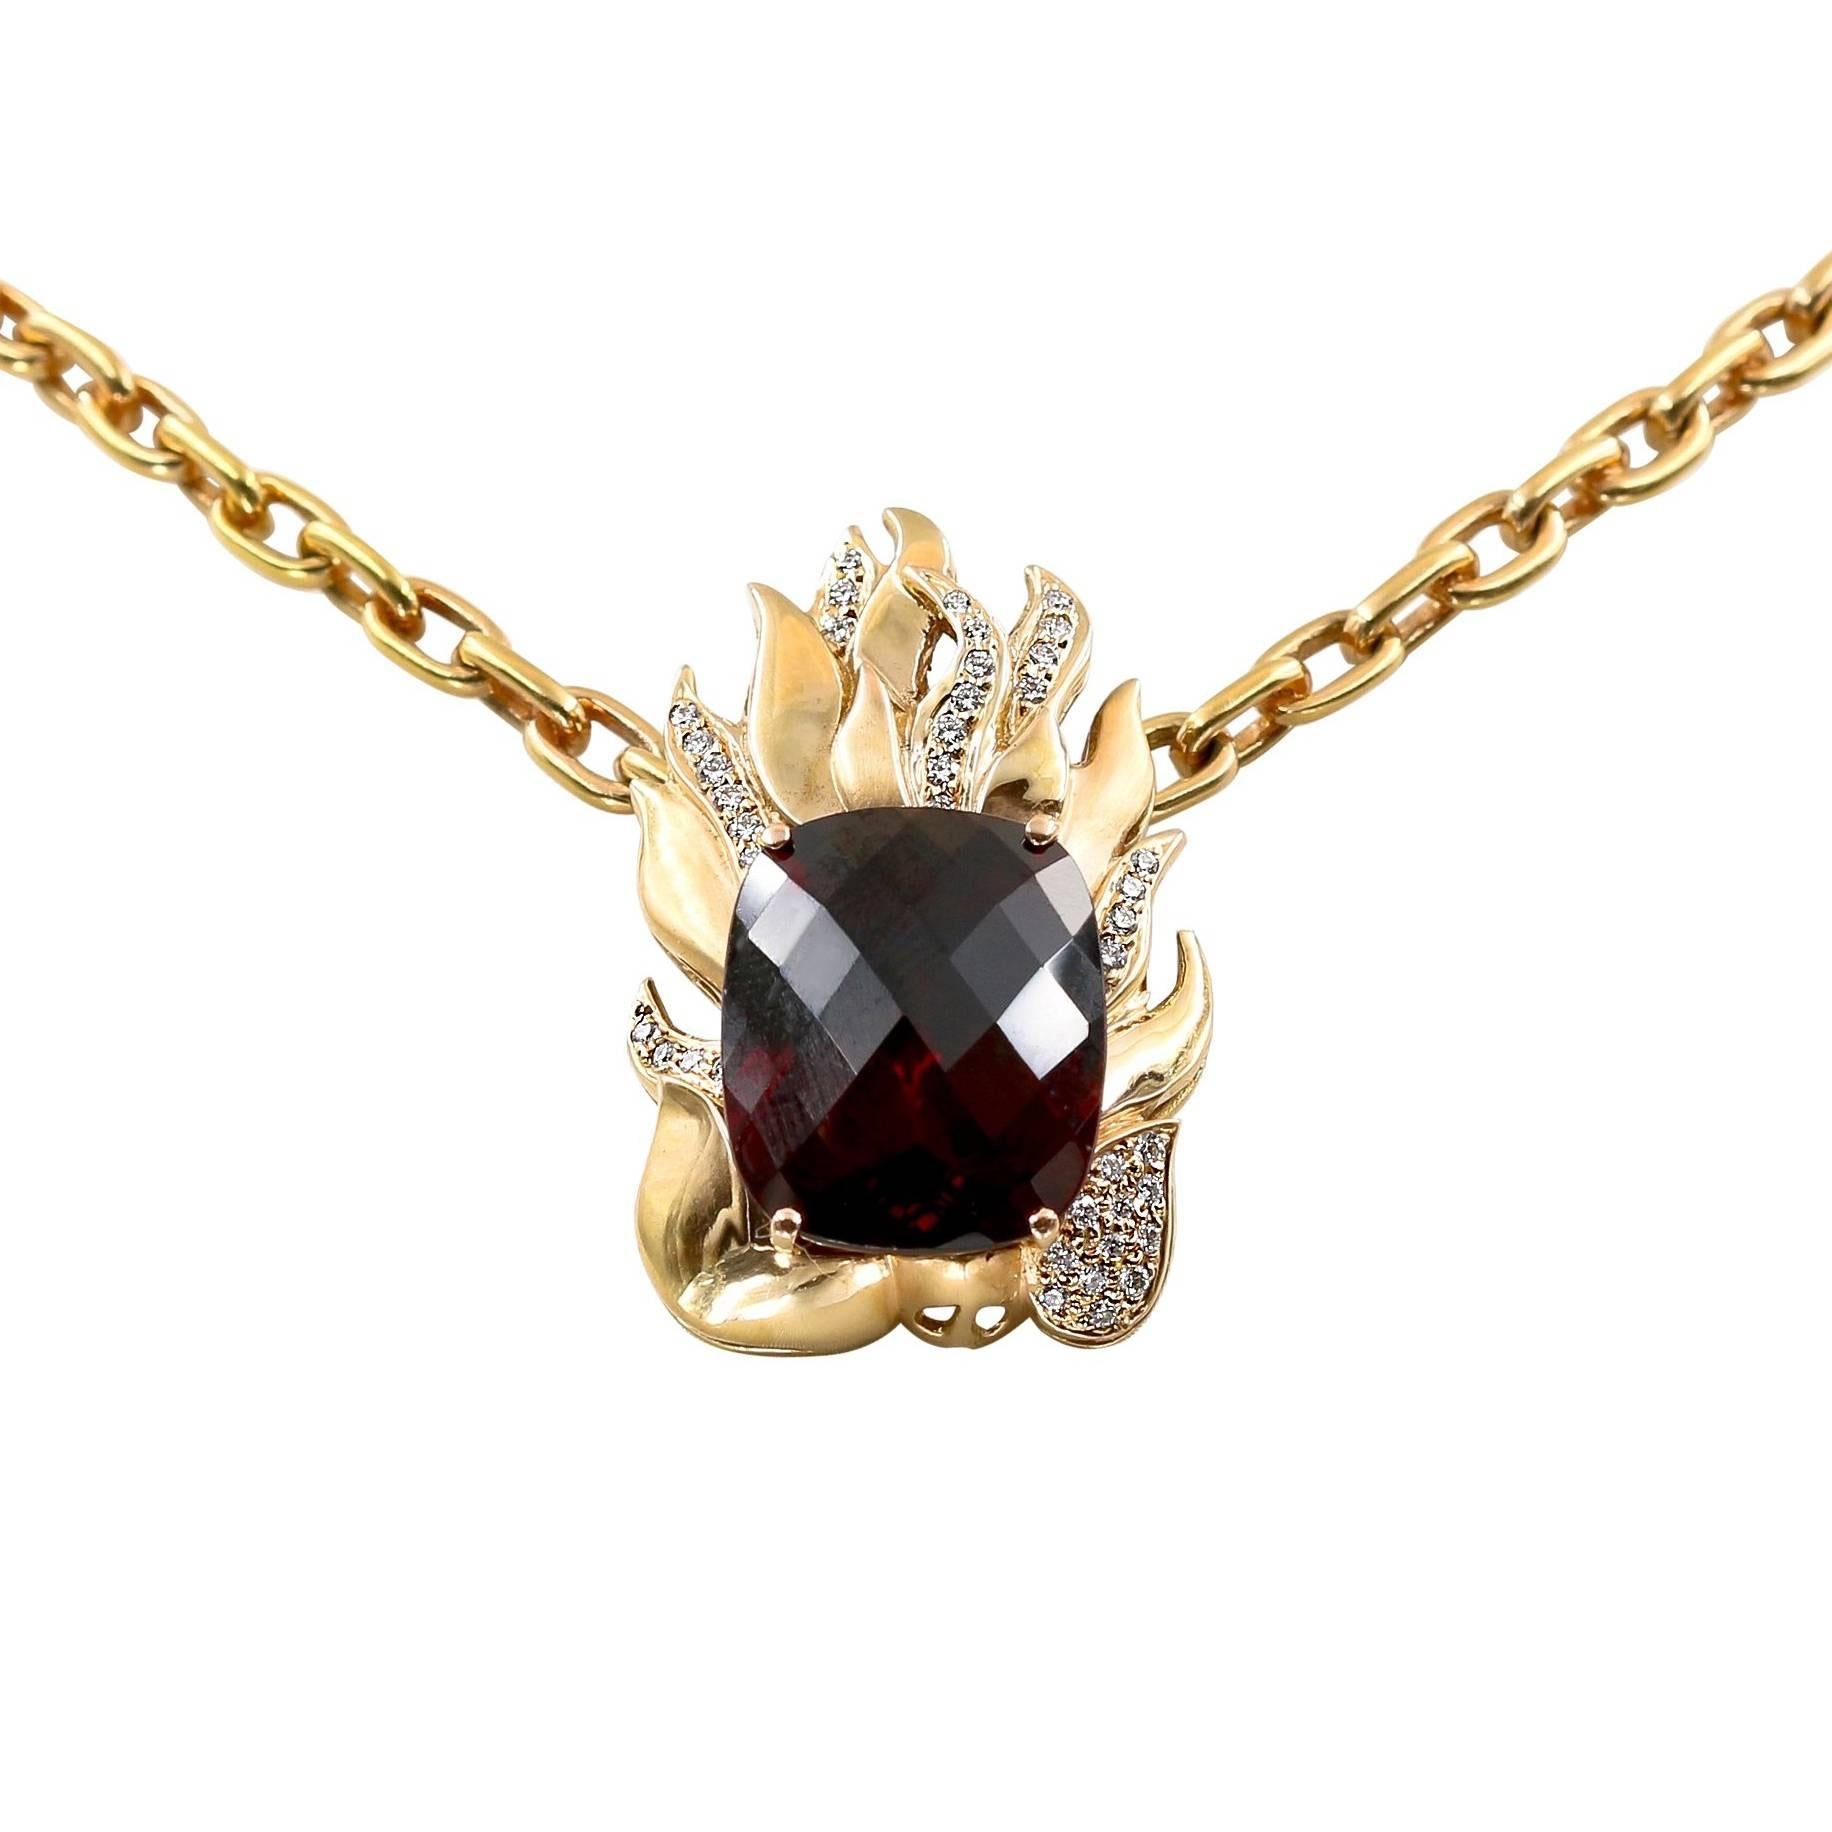 Extraordinary 21.39 Carat Natural Rhodolite and Diamond Necklace For Sale